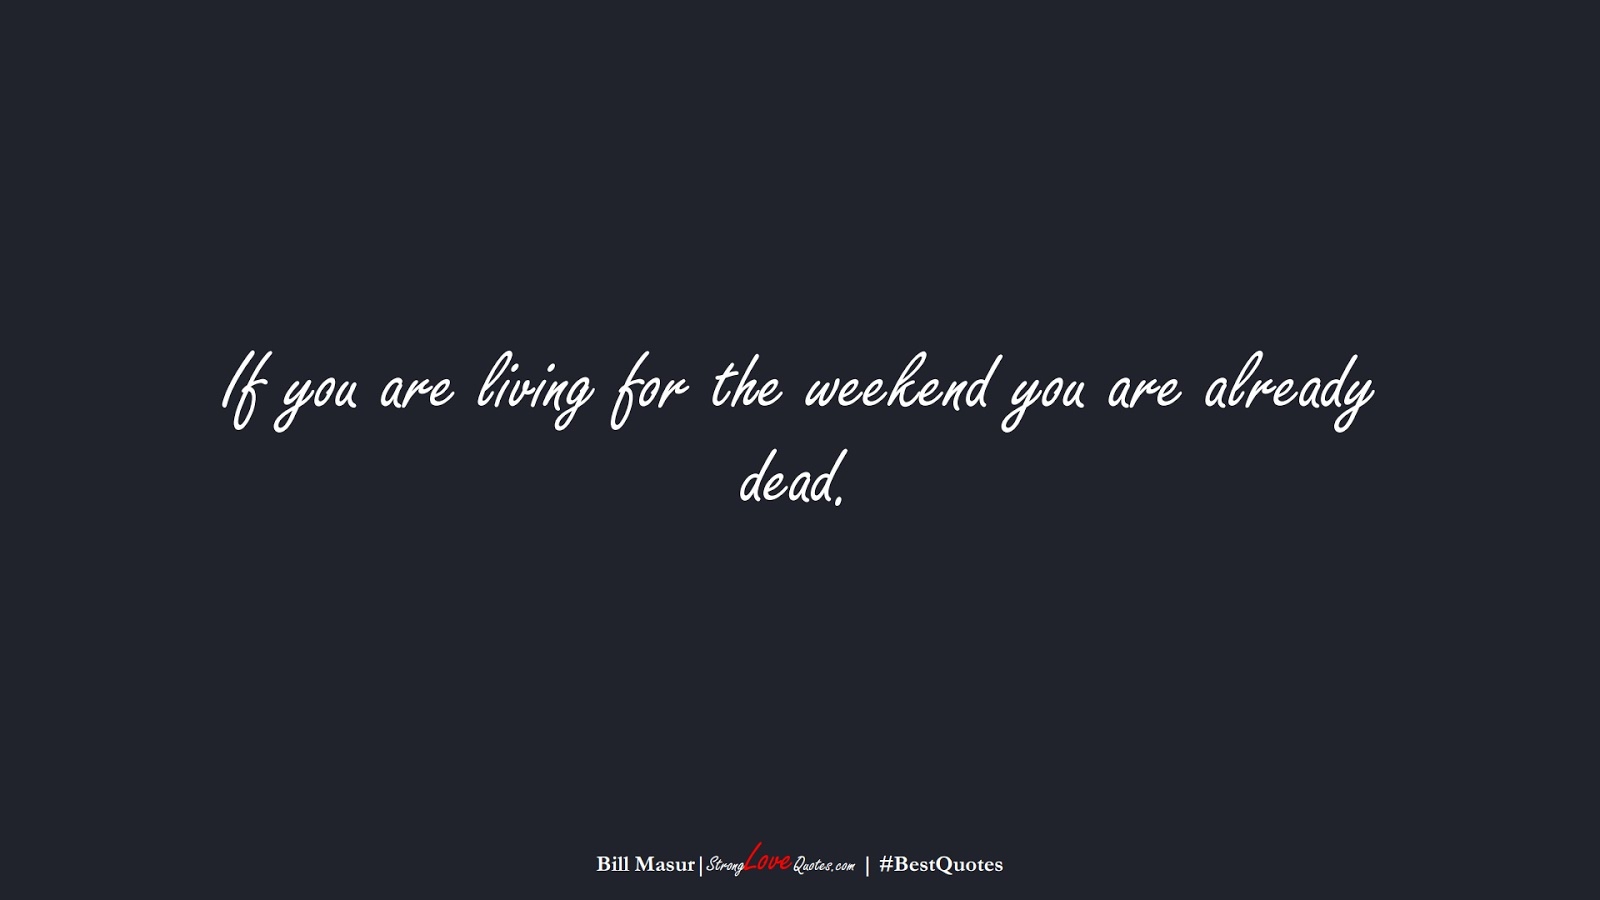 If you are living for the weekend you are already dead. (Bill Masur);  #BestQuotes